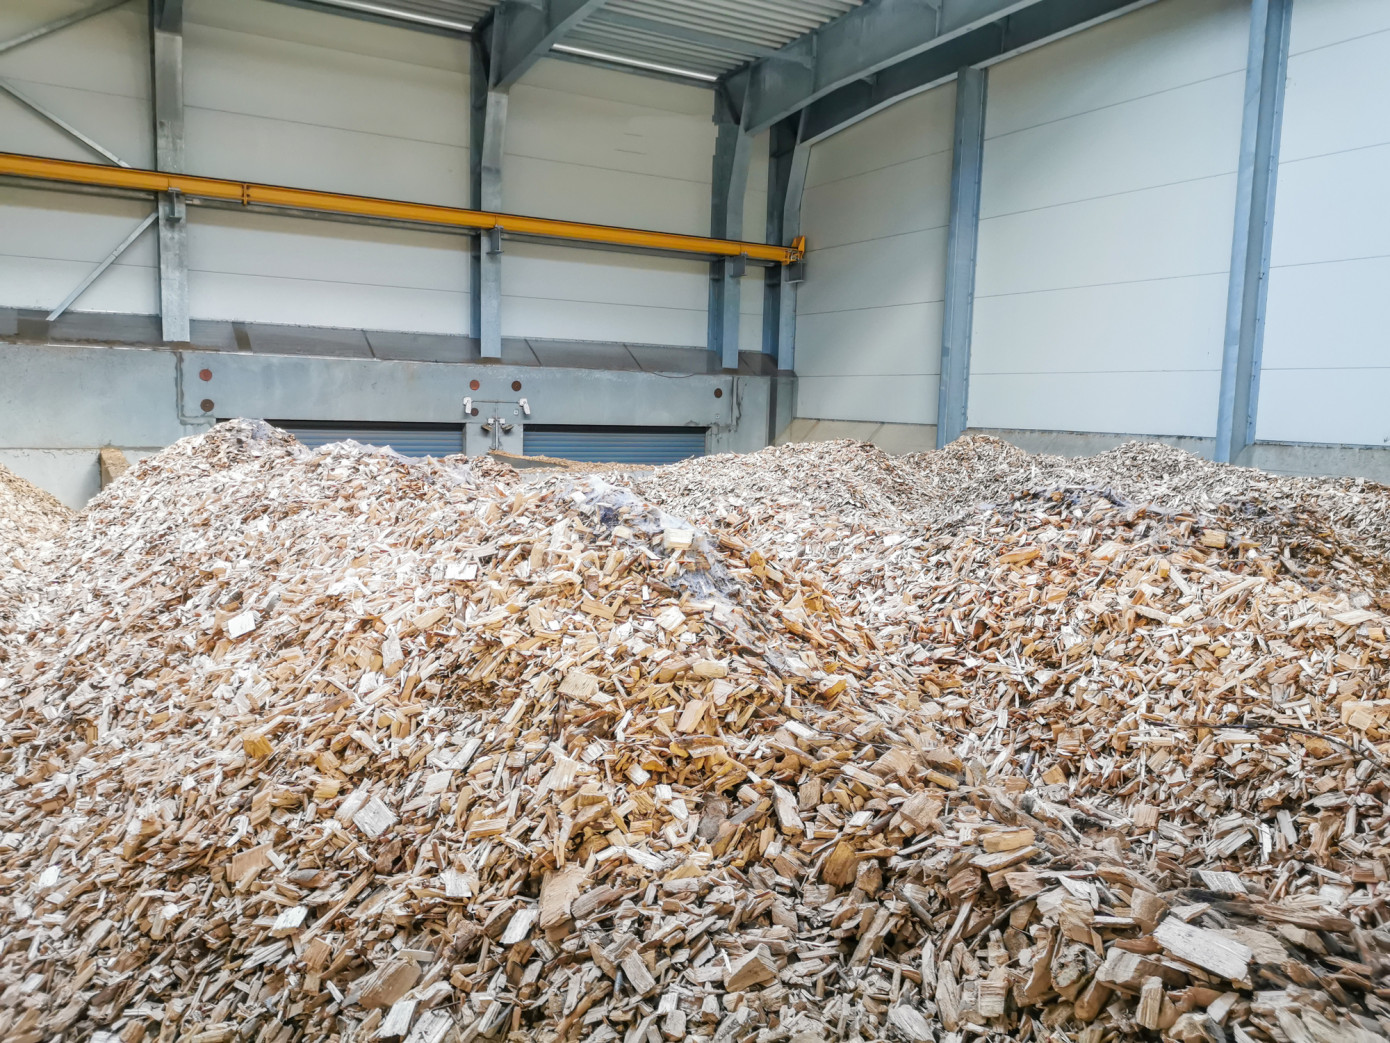 In February, price for wood chips imported to European Union adds 0.3%